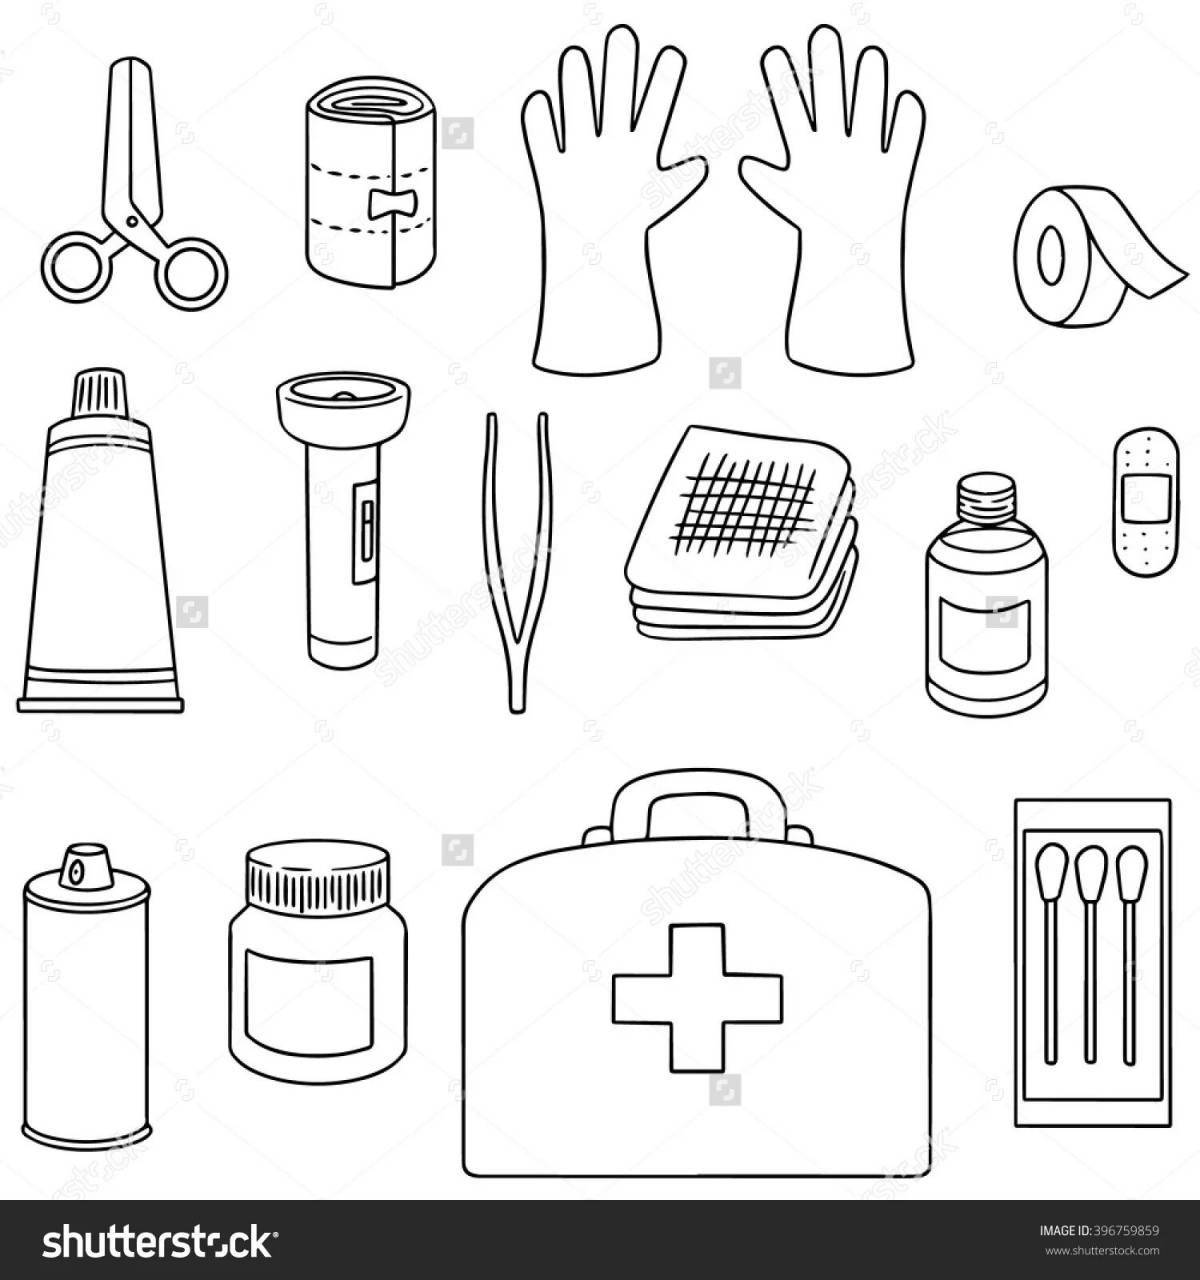 First aid kit amazing coloring book